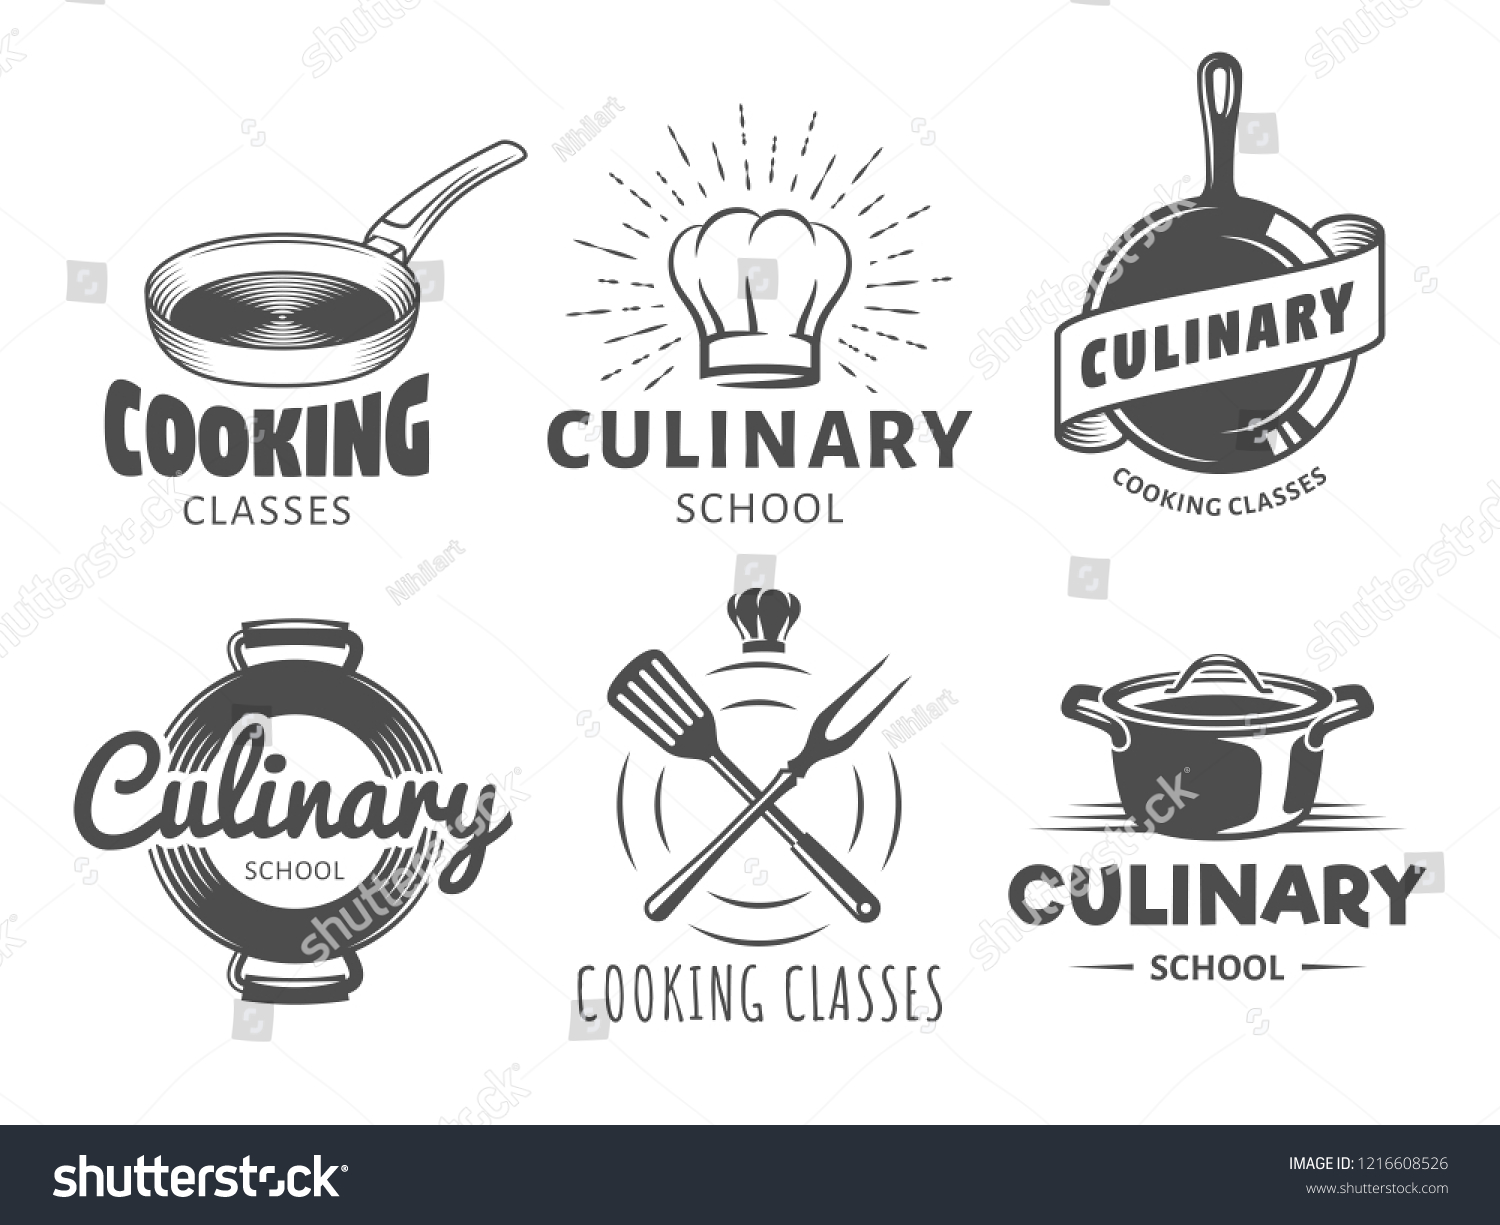 Culinary school logos. Vector badges for cooking classes, workshops and courses. Set of vintage monochrome labels with chefs hat, pans and kitchenware #1216608526